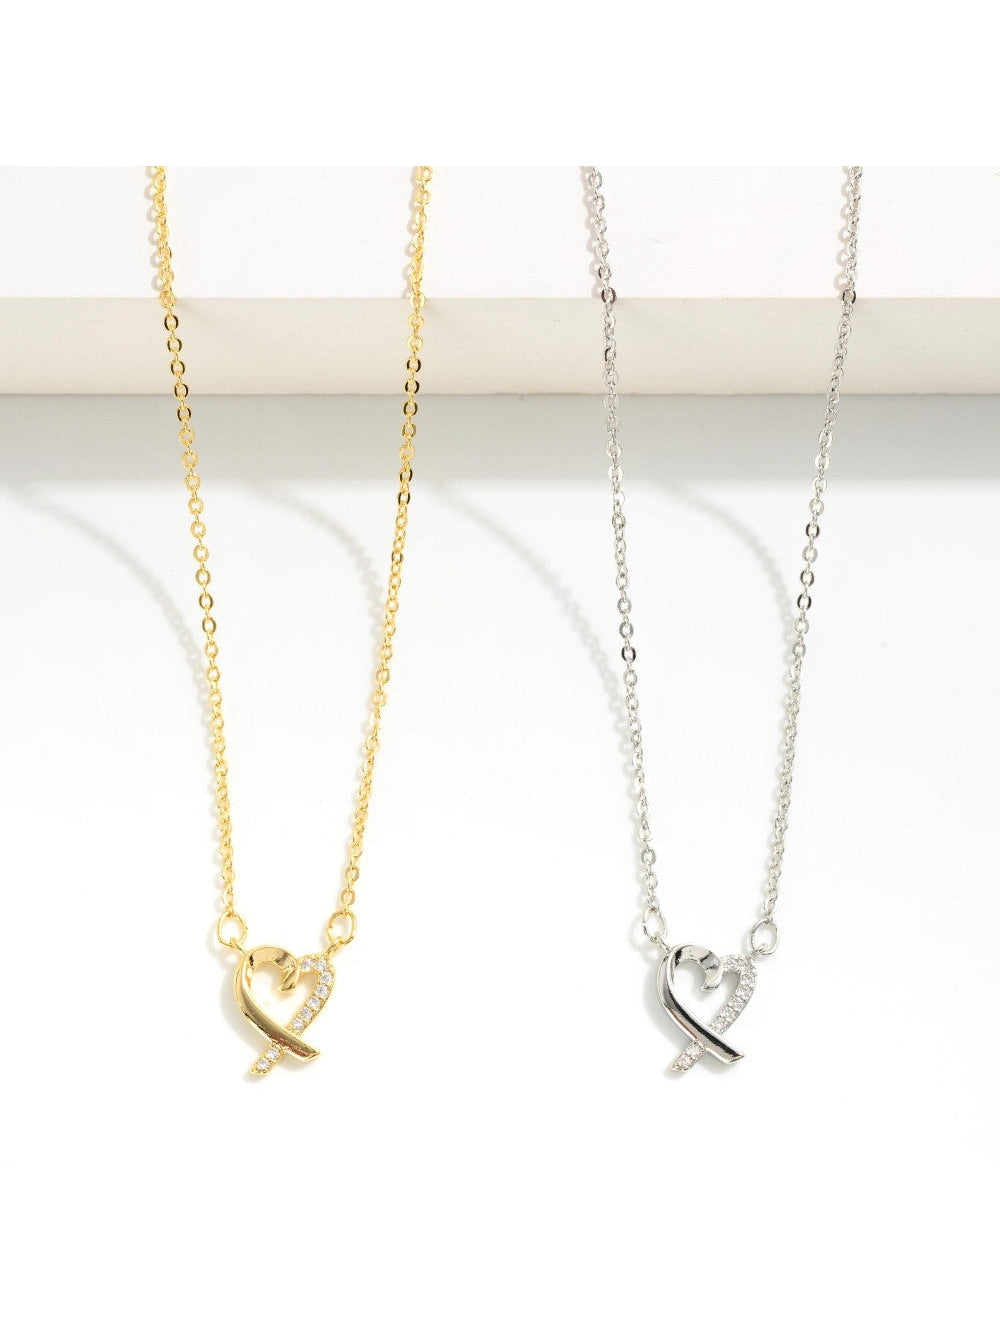 VARIOUS HEART NECKLACES